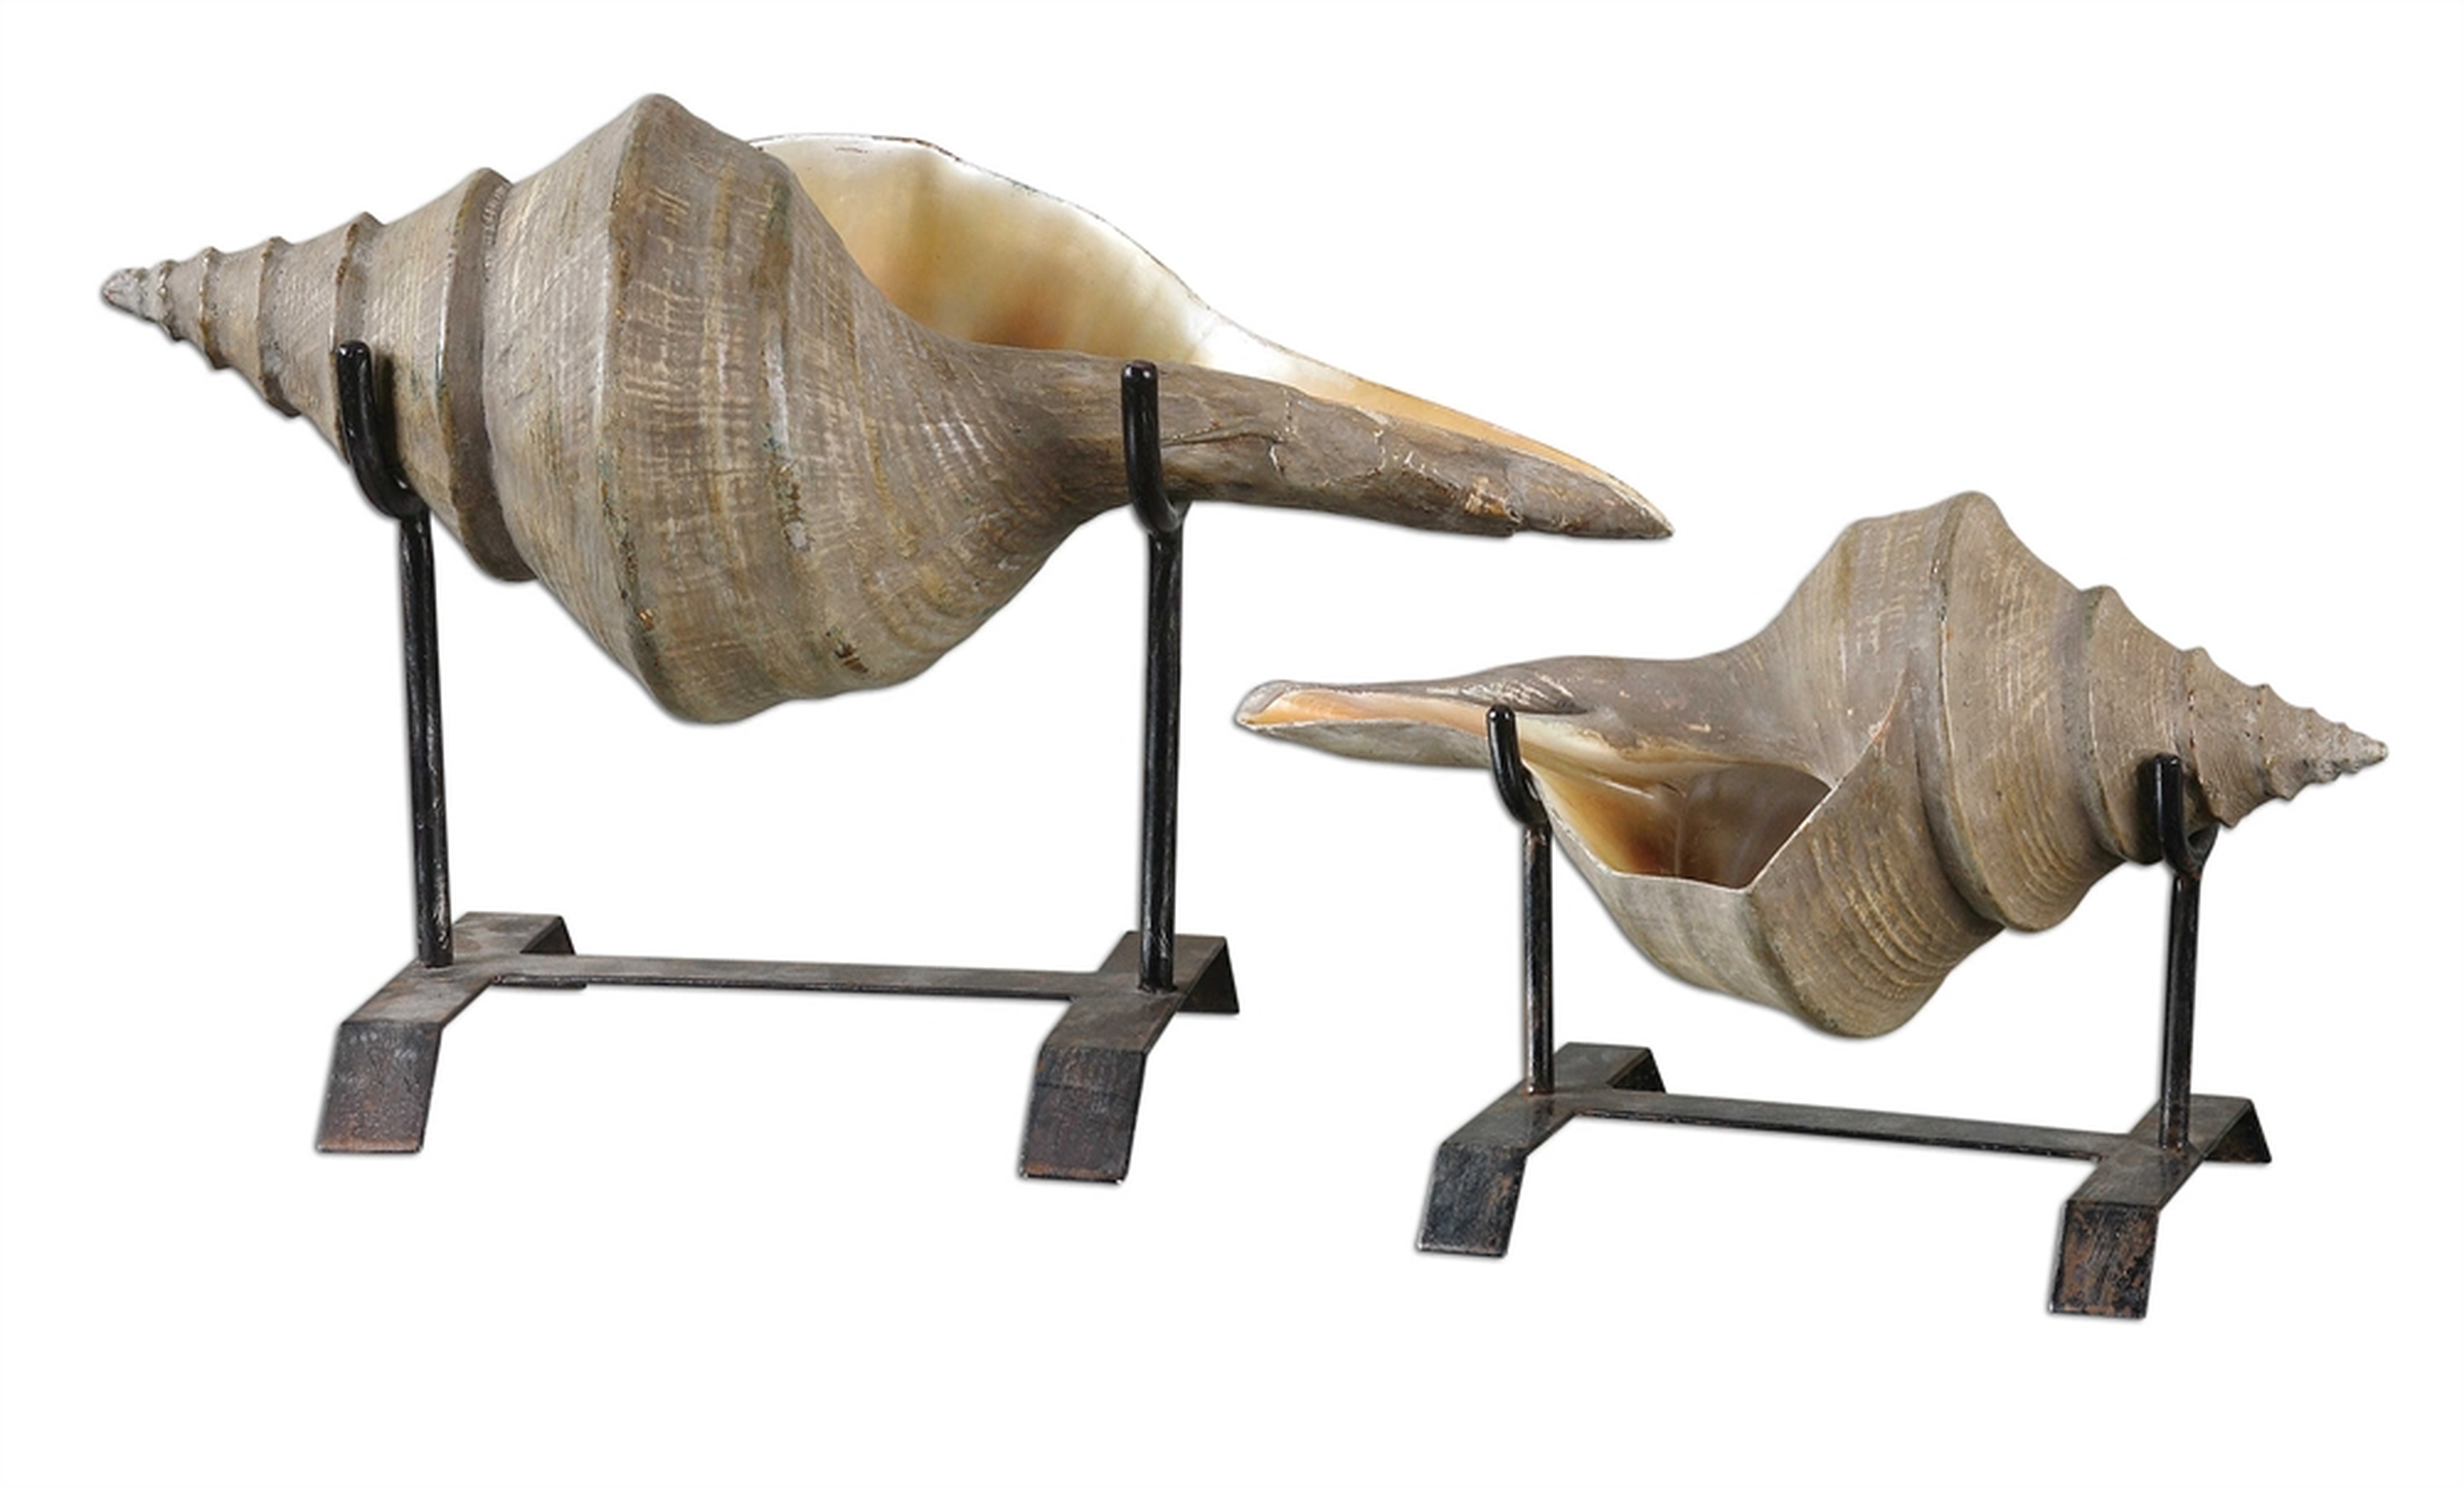 Conch Shell, Sculpture, S/2 - Hudsonhill Foundry